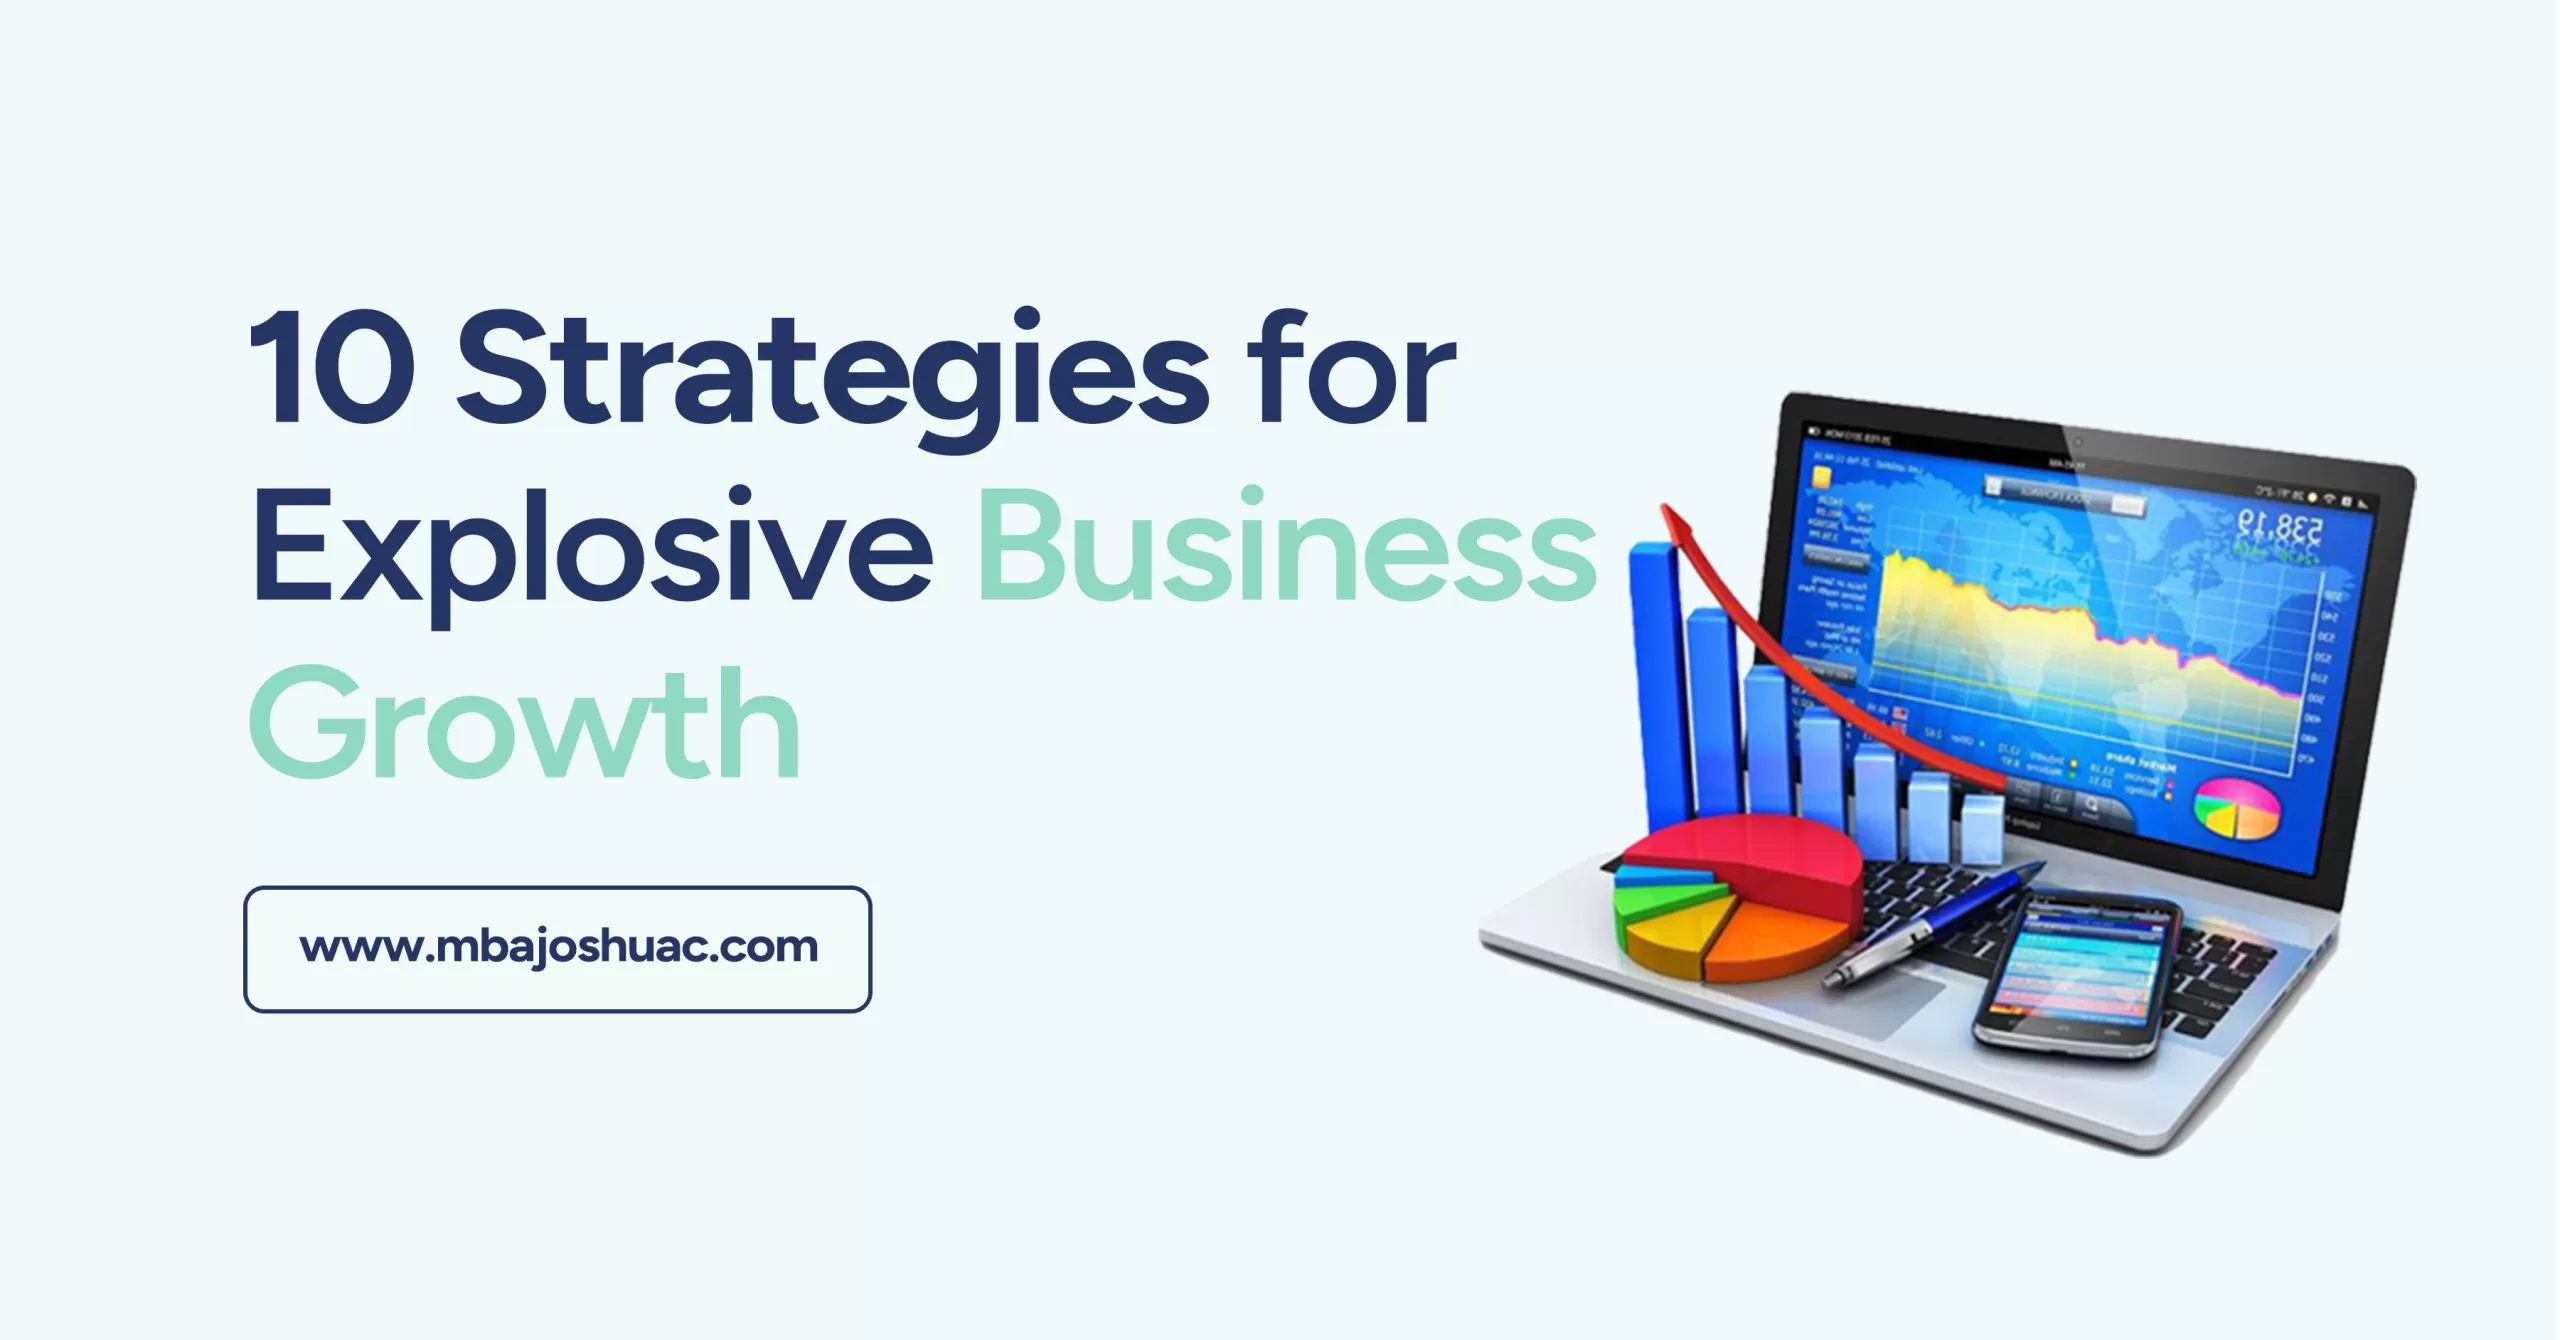 10 Strategies for Explosive Business Growth